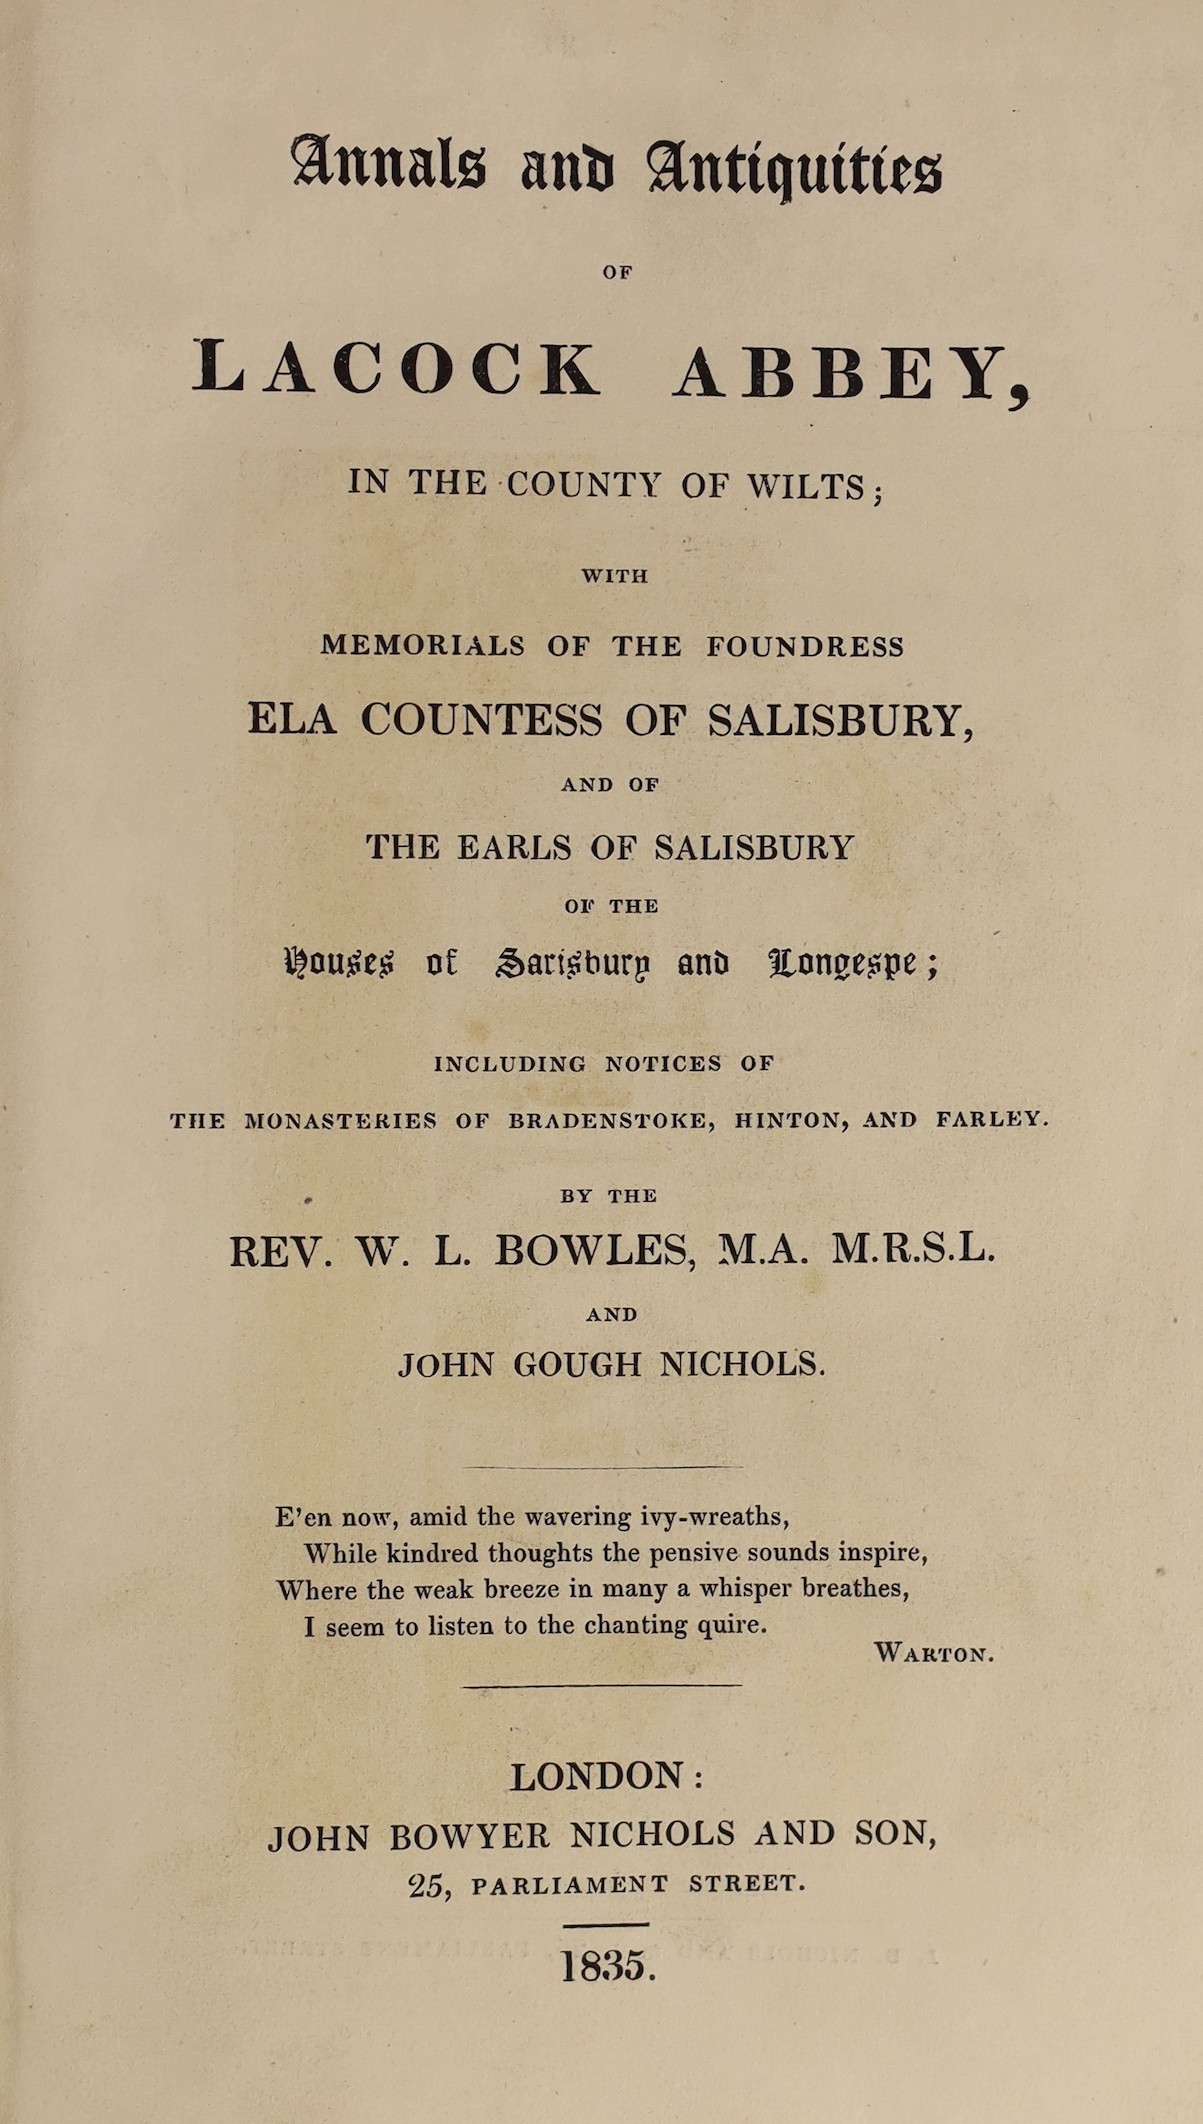 WILTSHIRE: Bowles, Rev. W.L. and Nichols, John Gough - Annals and Antiquities of Lacock Abbey.... with Memorials of the Foundress Ela Countess of Salisbury. 14 plates, 5 pedigrees (2 folded), text engravings; original cl